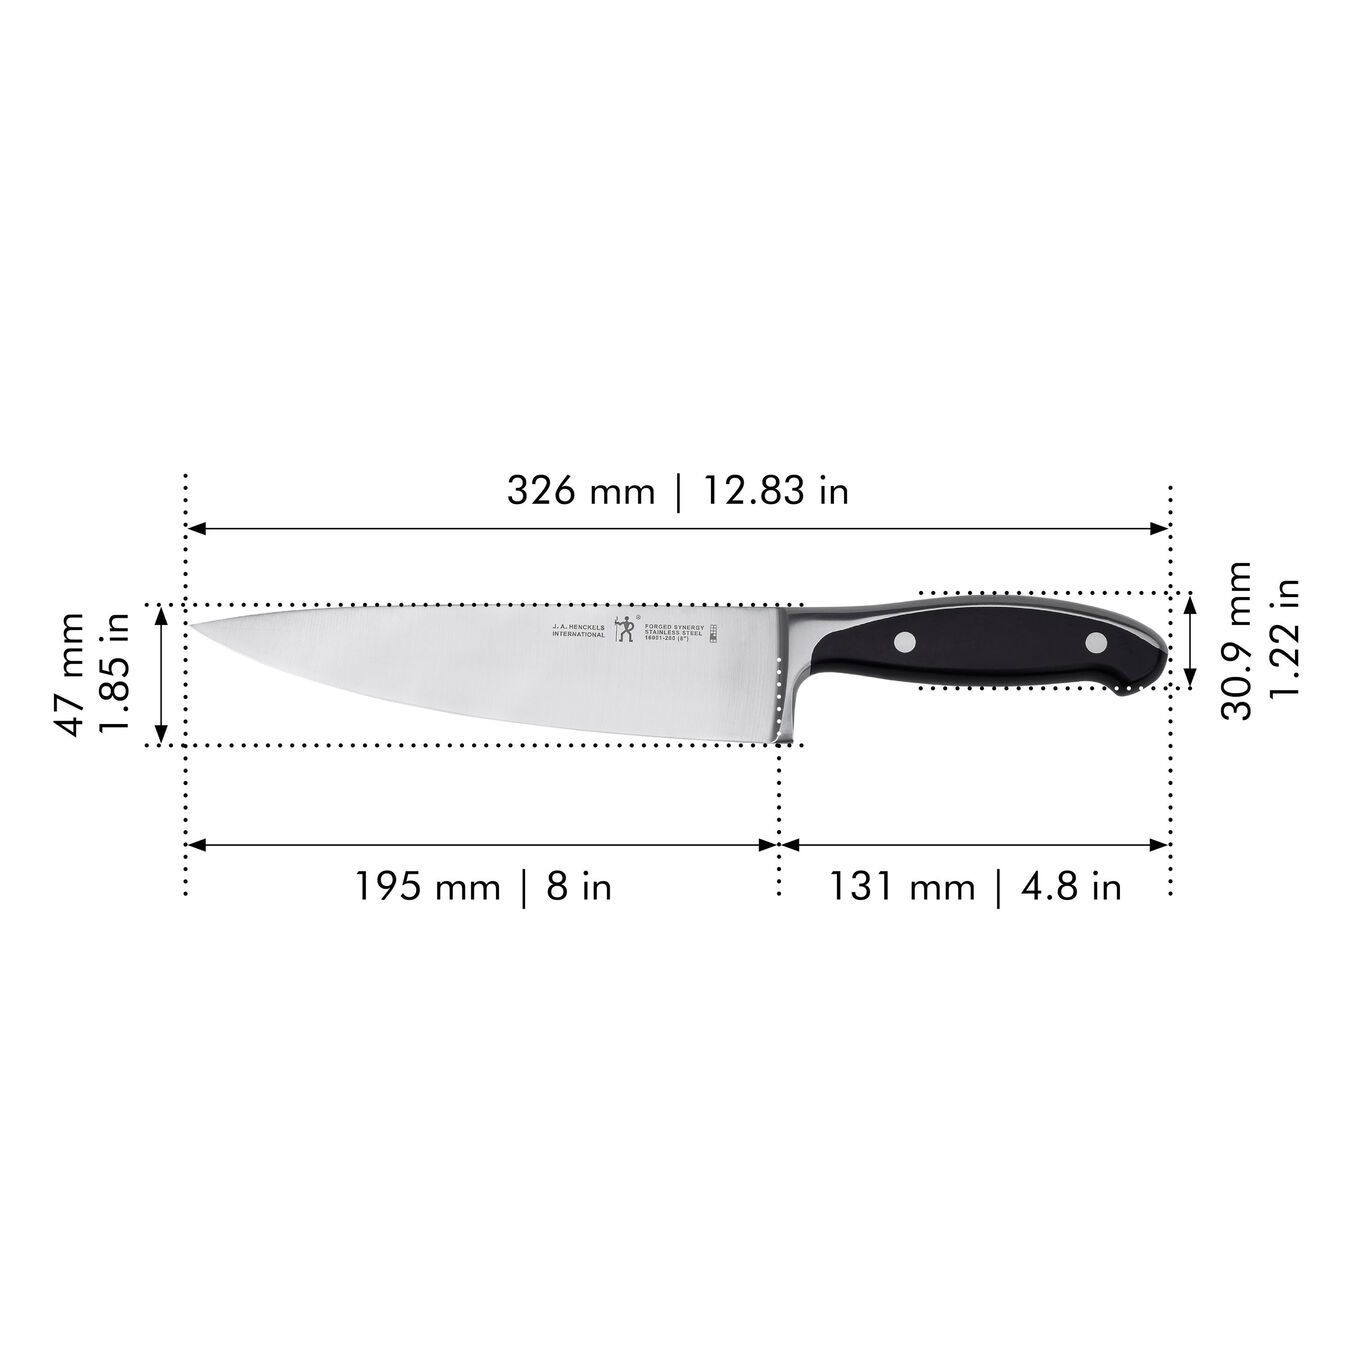 8-inch, Chef's knife,,large 2